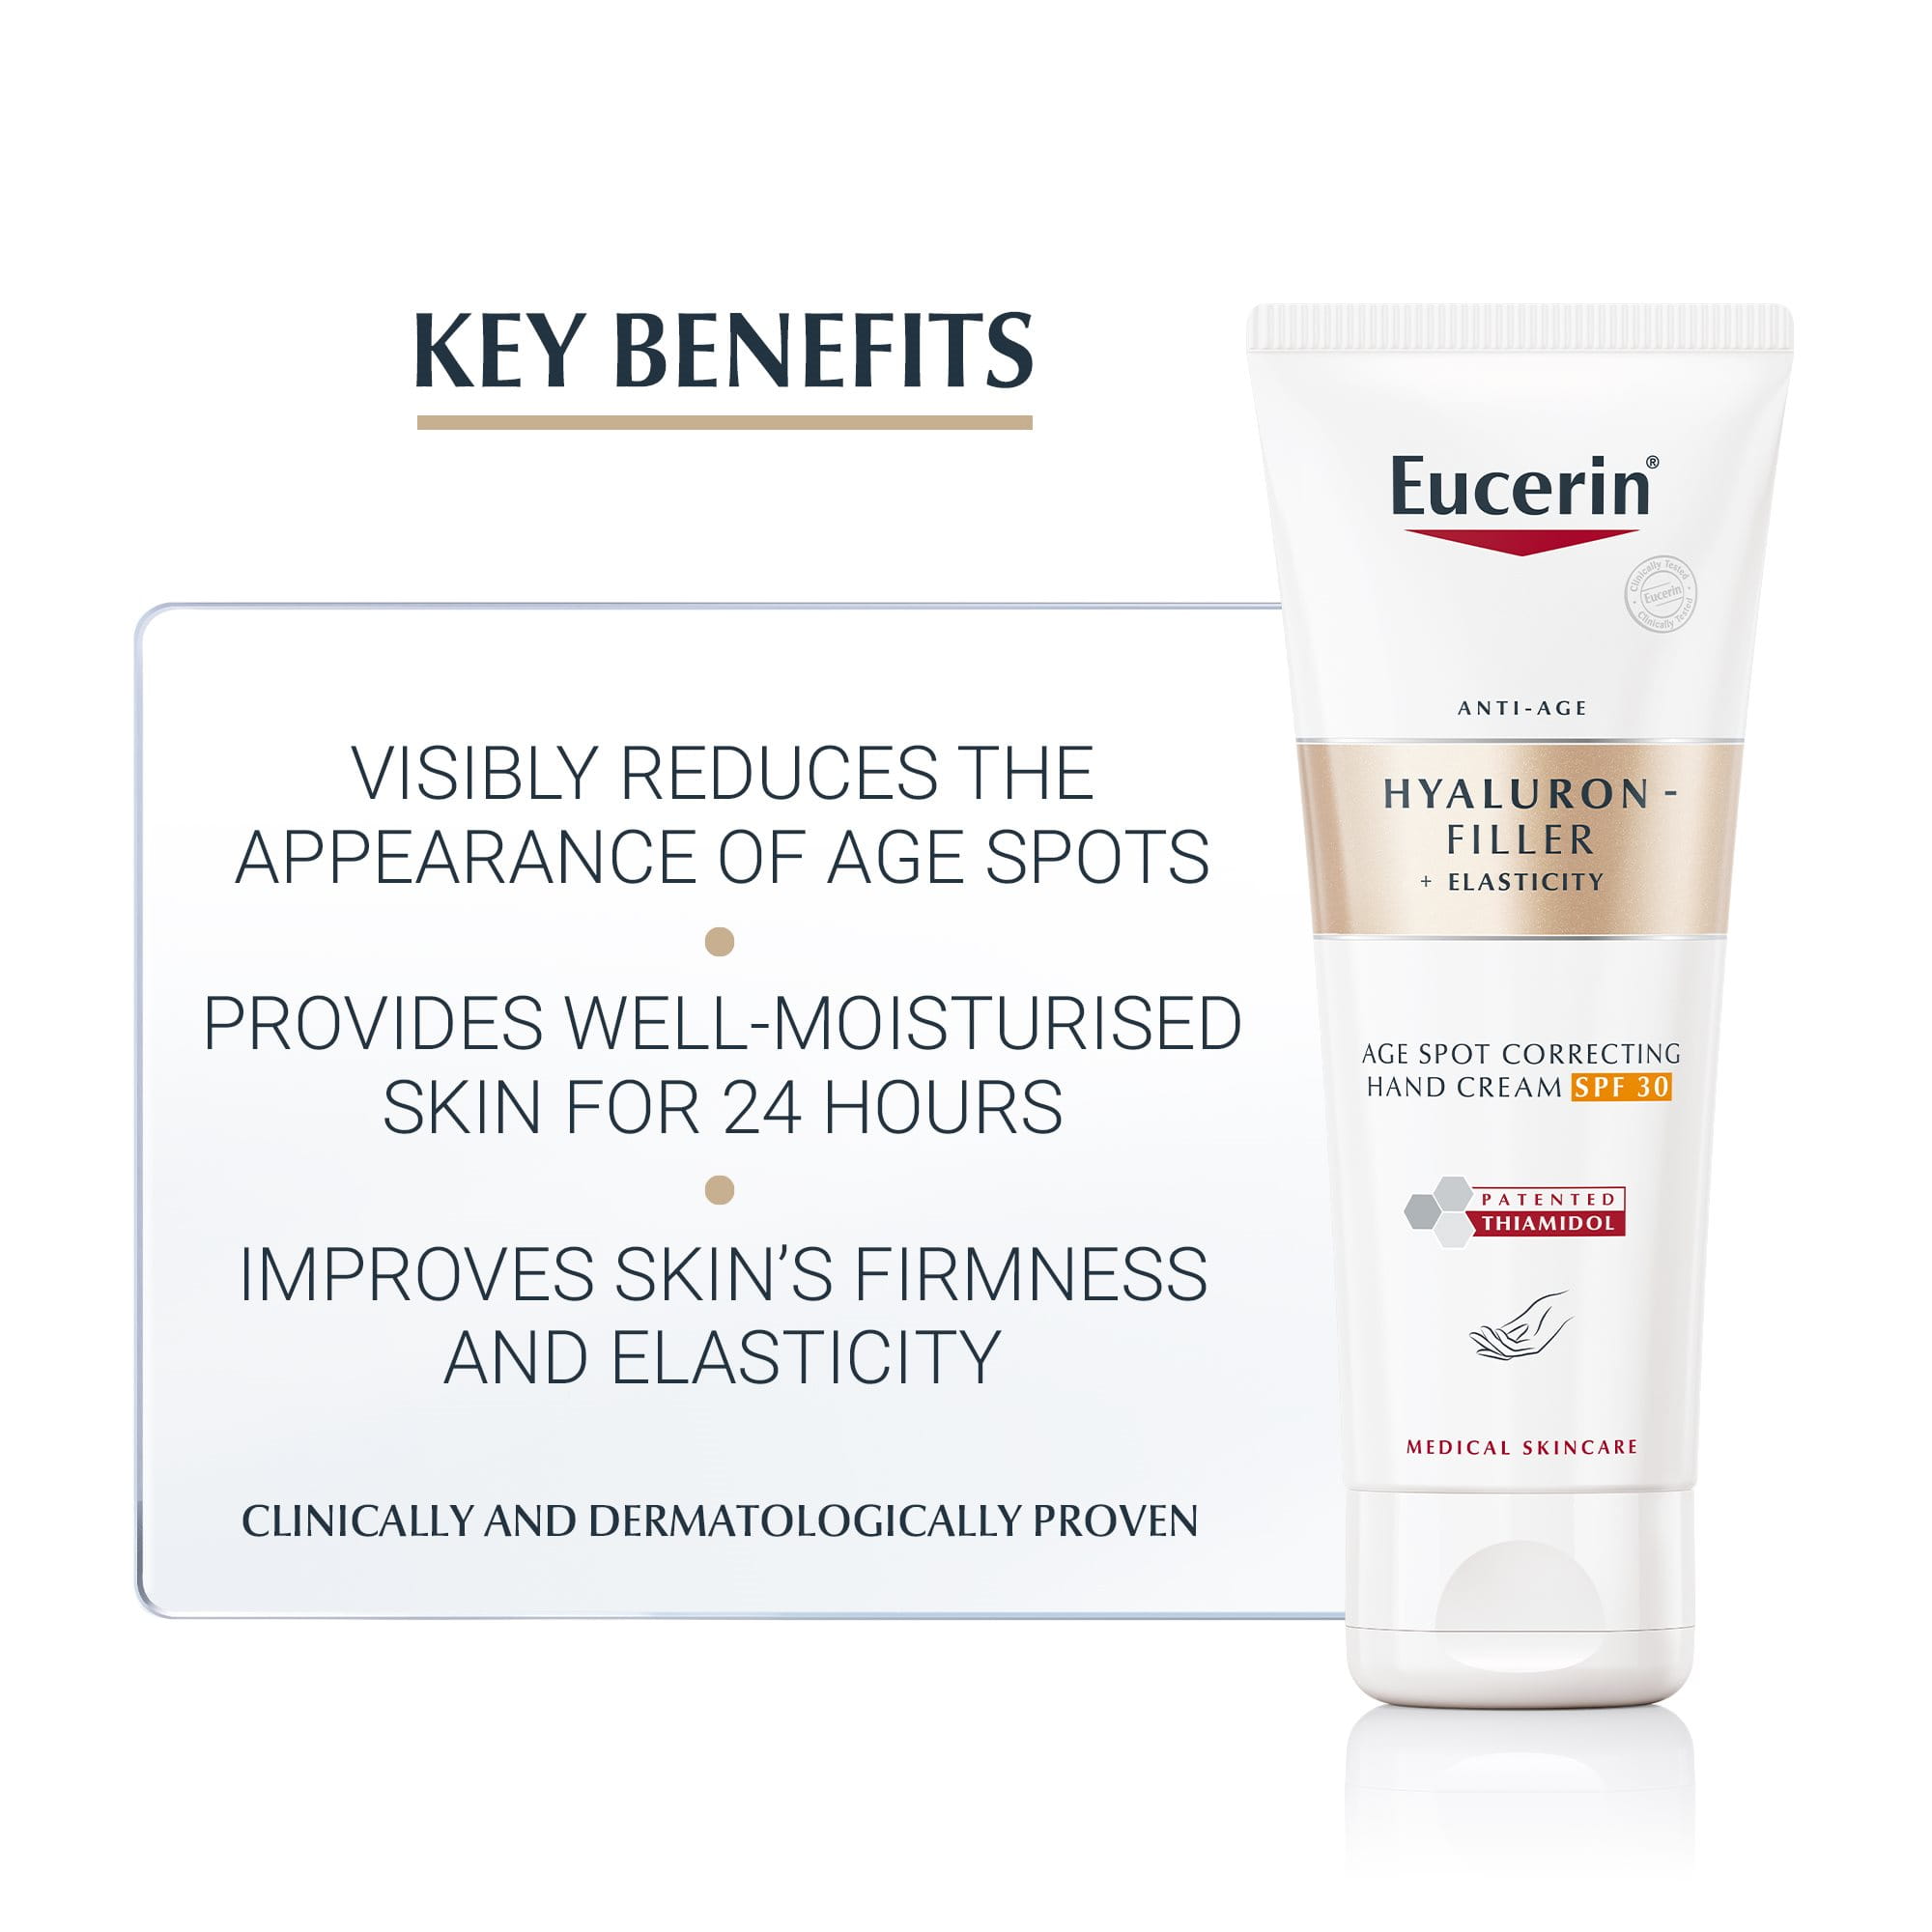 Eucerin Hyaluron-Filler + Elasticity Age Spot Correcting Hand Cream - Visibly reduces the appearance of pigment spots on the hands